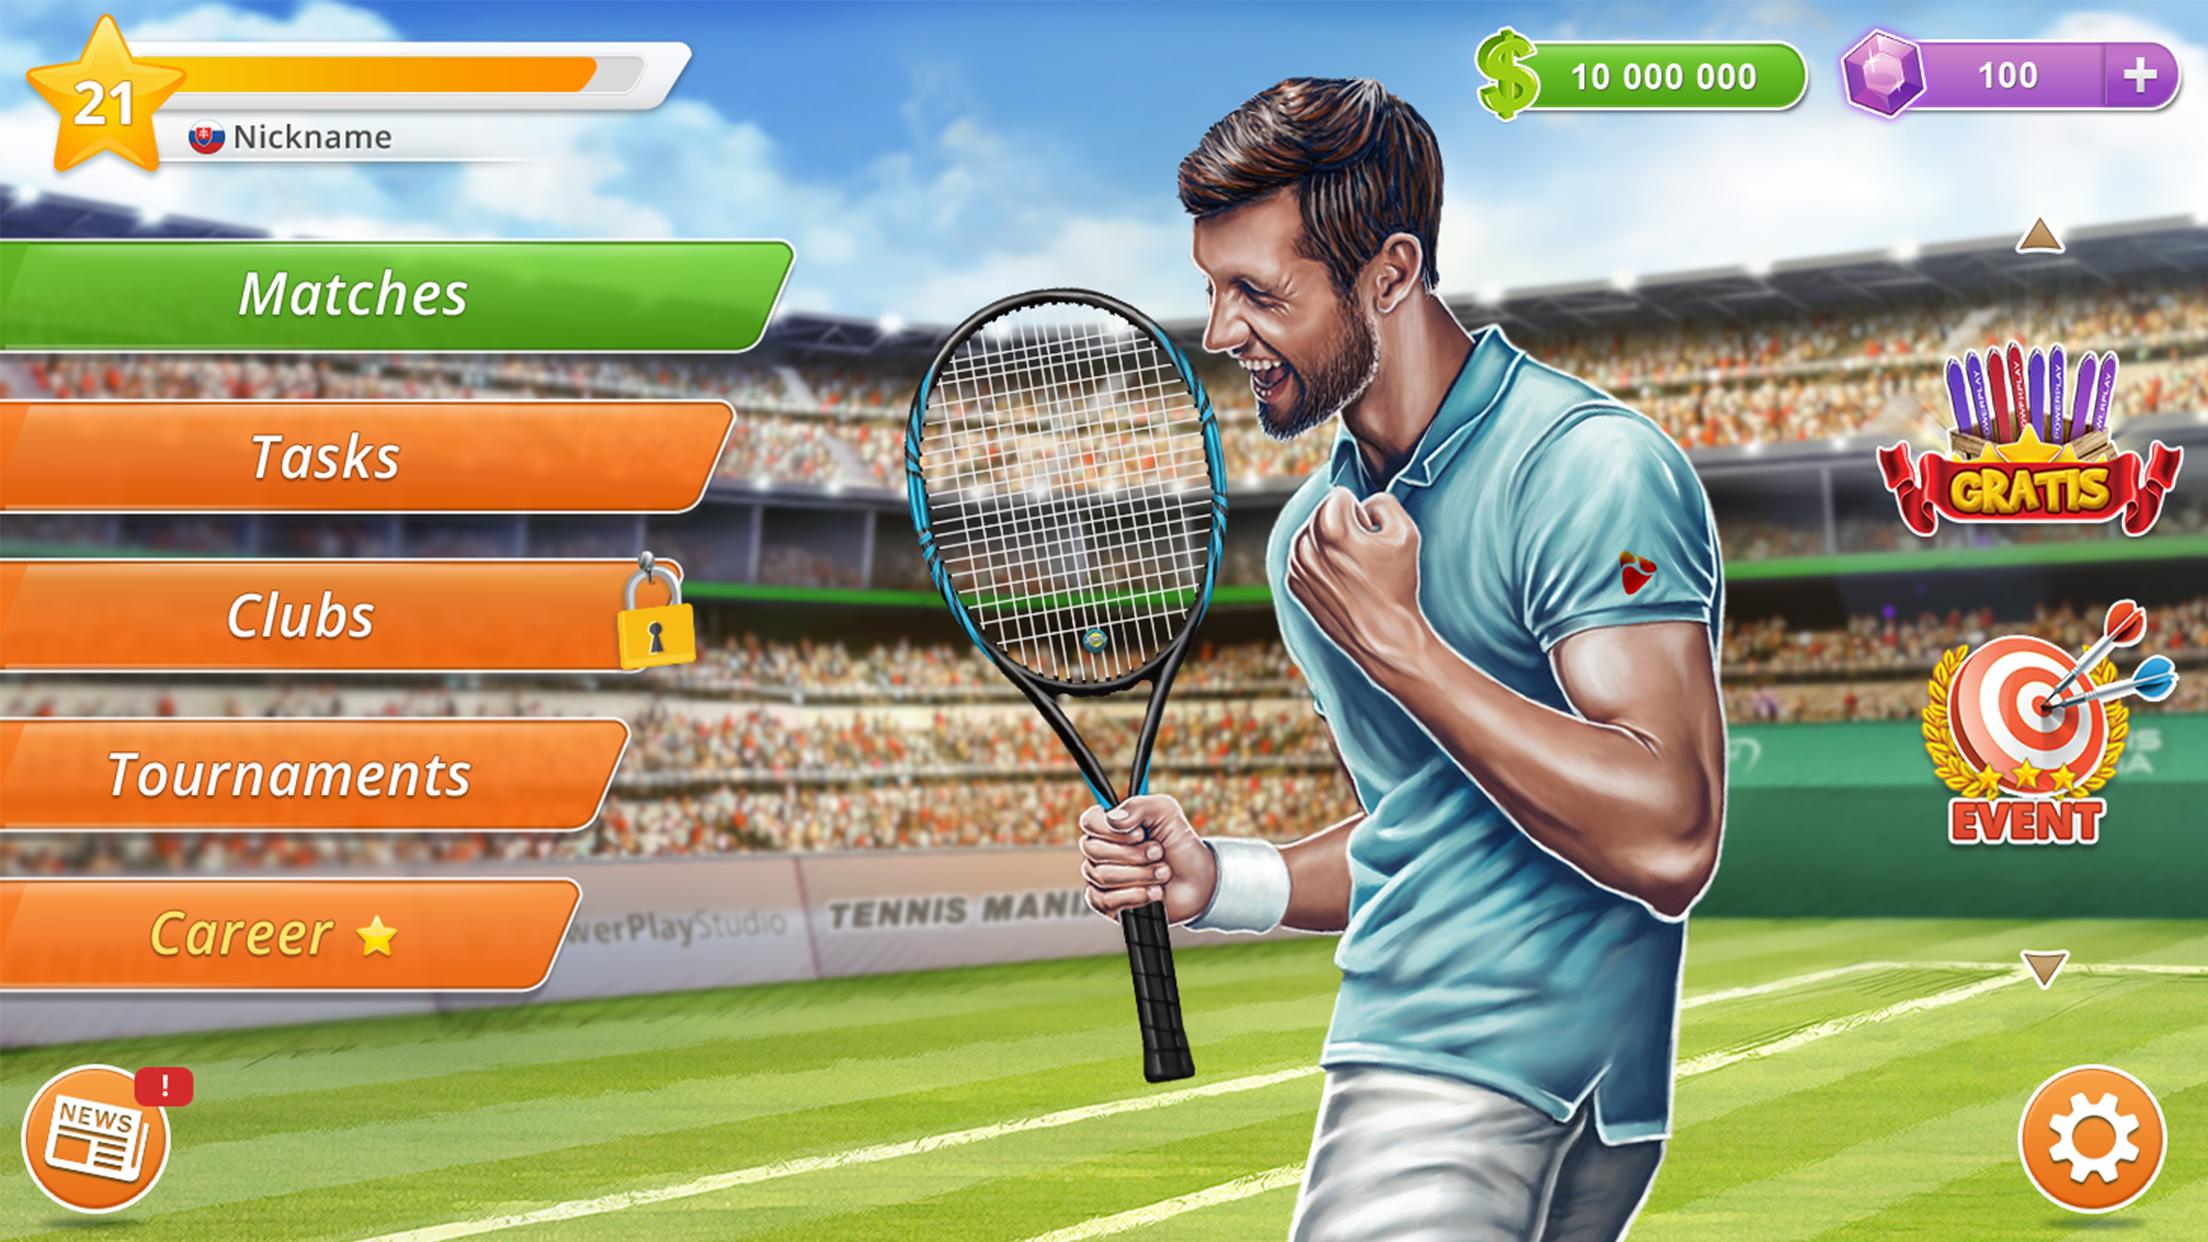 Tennis Mania for Android - APK Download